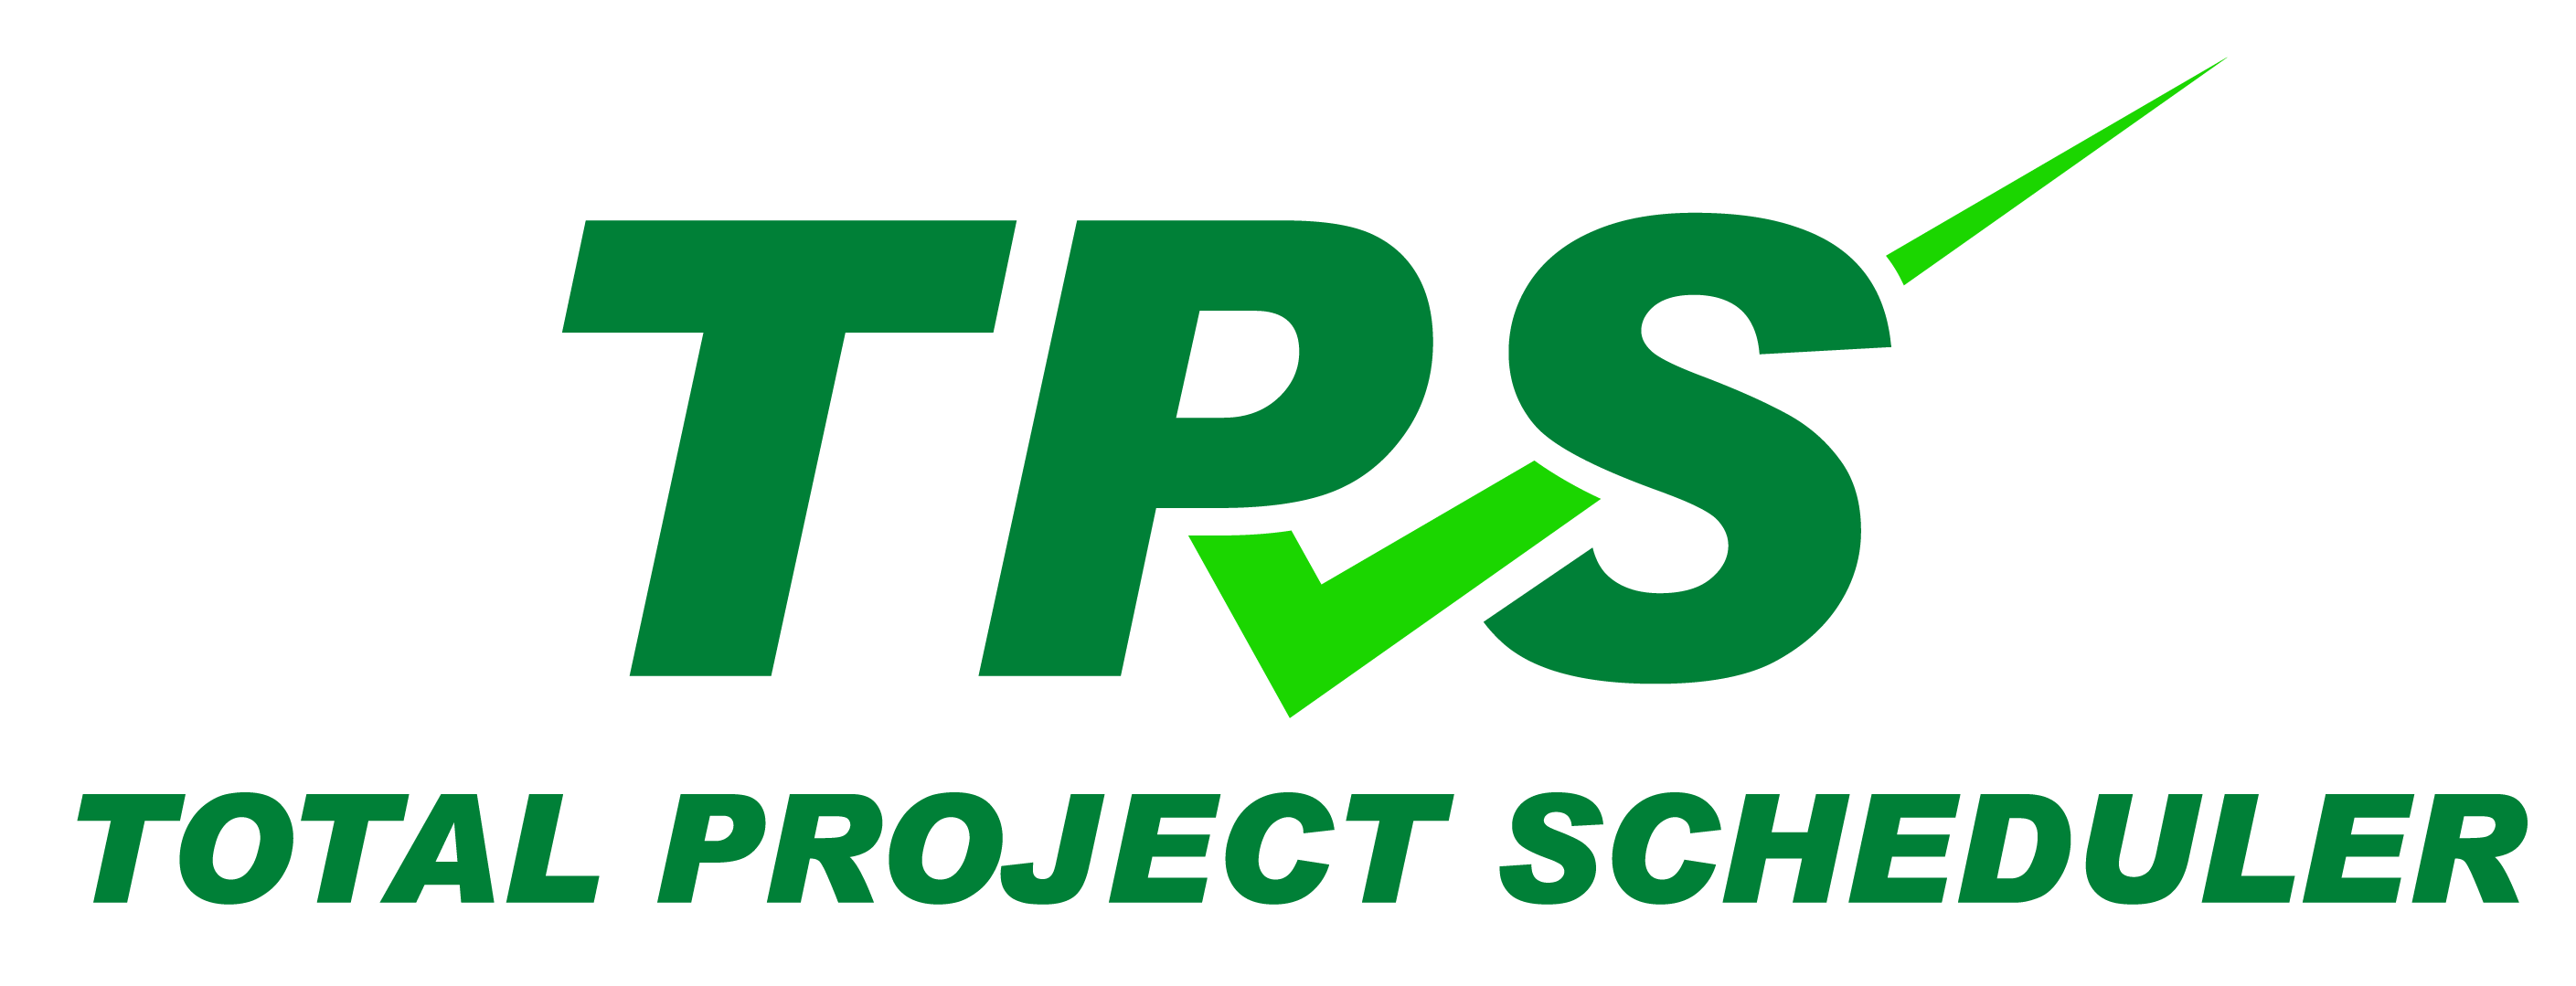 Total Project Scheduler